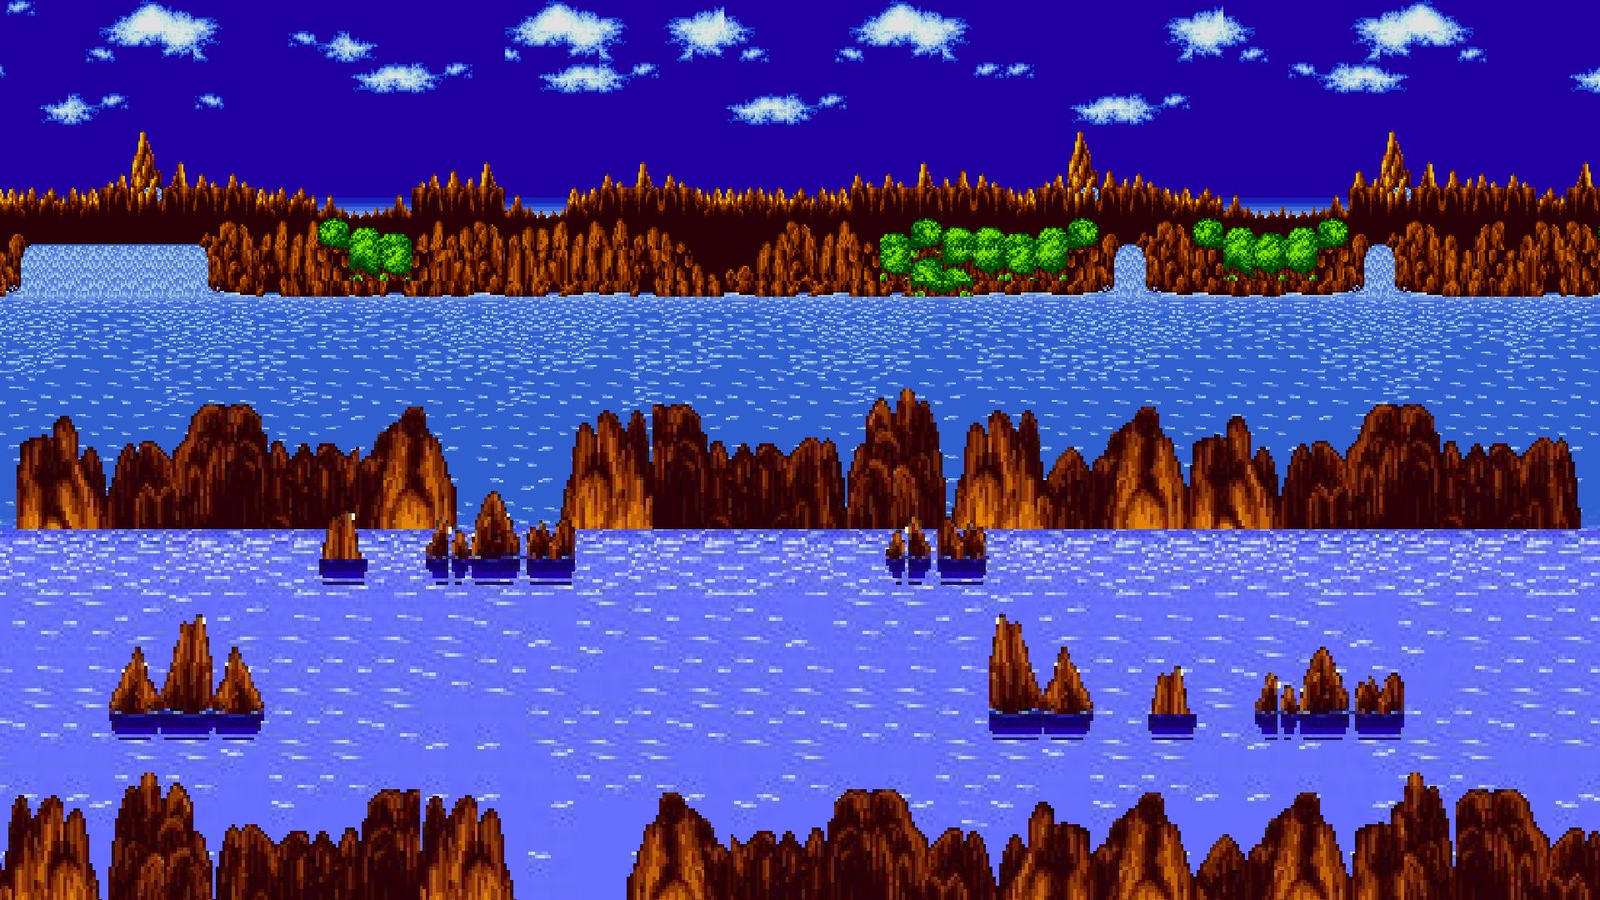 So what Green Hill Zone background should I use for Hill Act 1 for